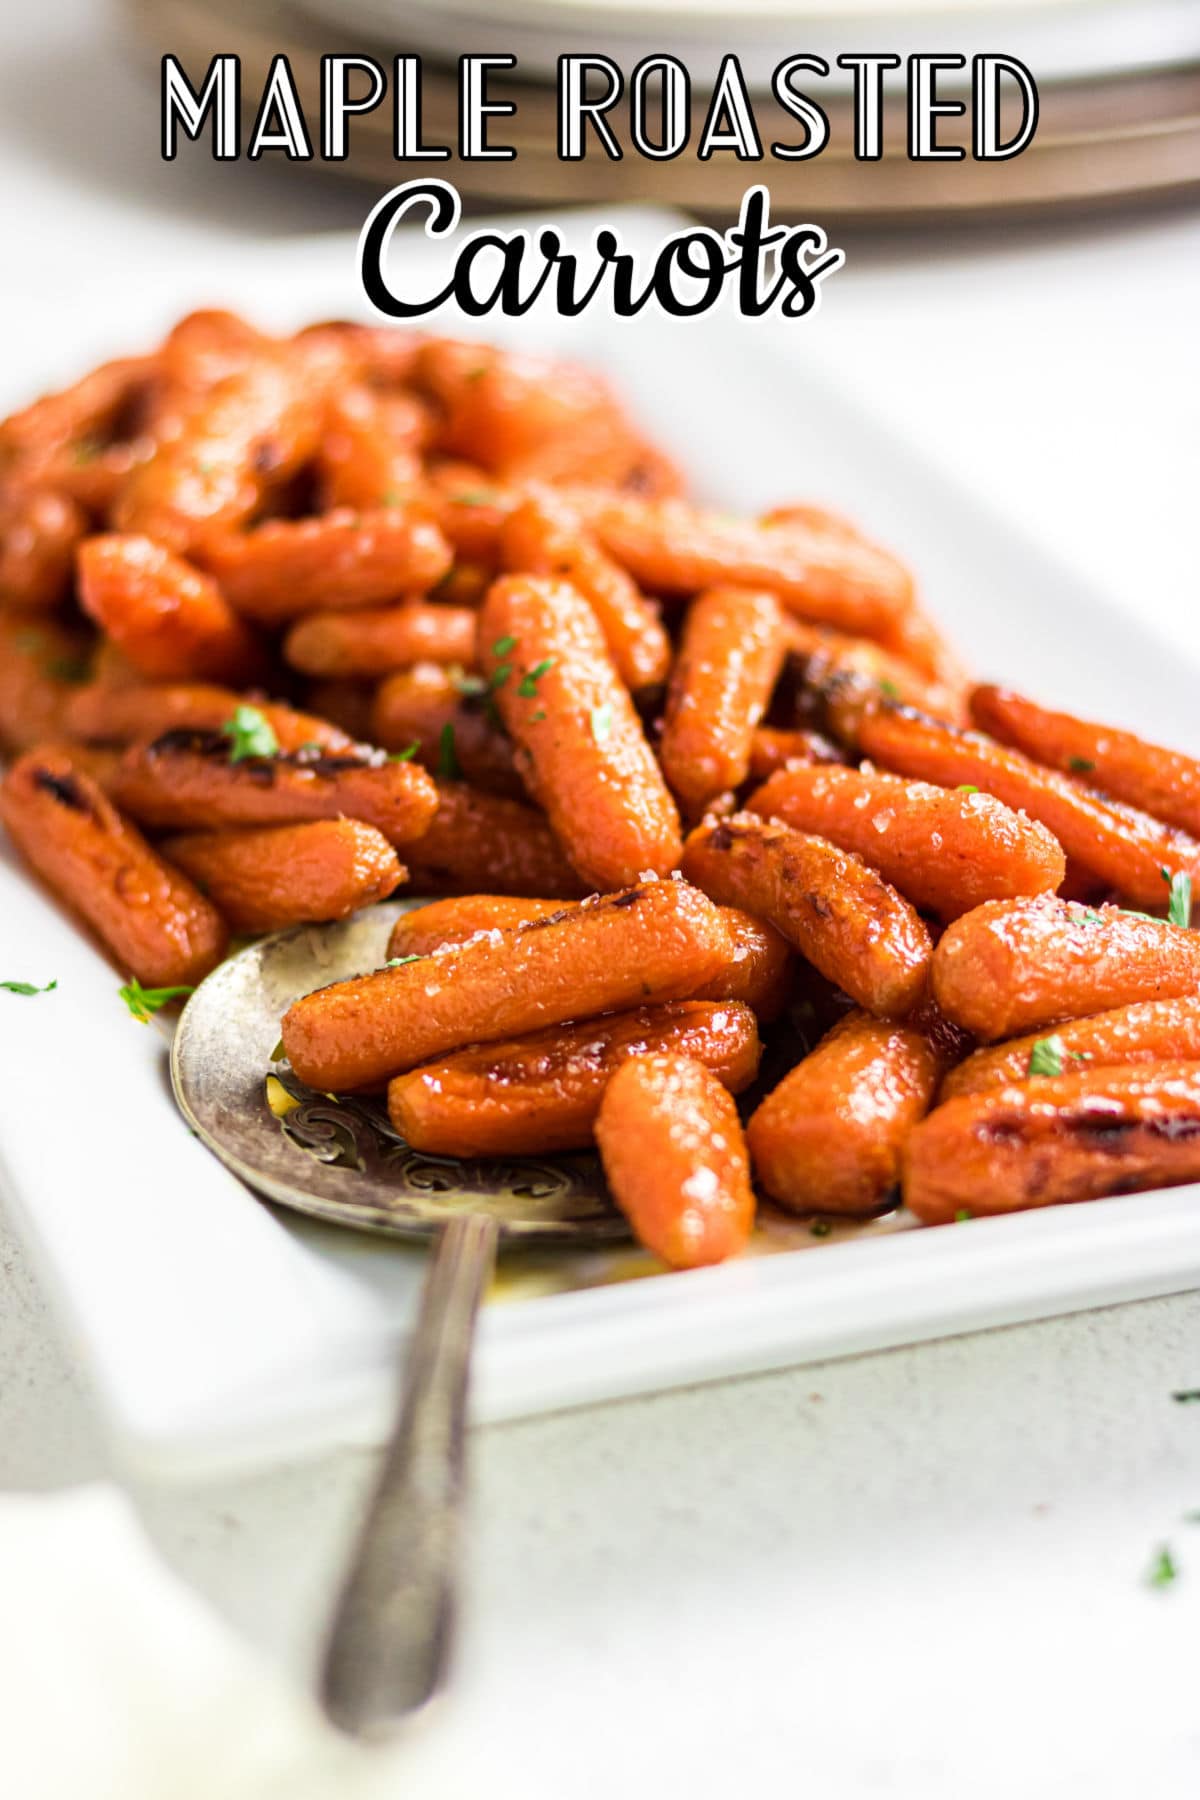 Finished carrots on a white platter with title text overlay.